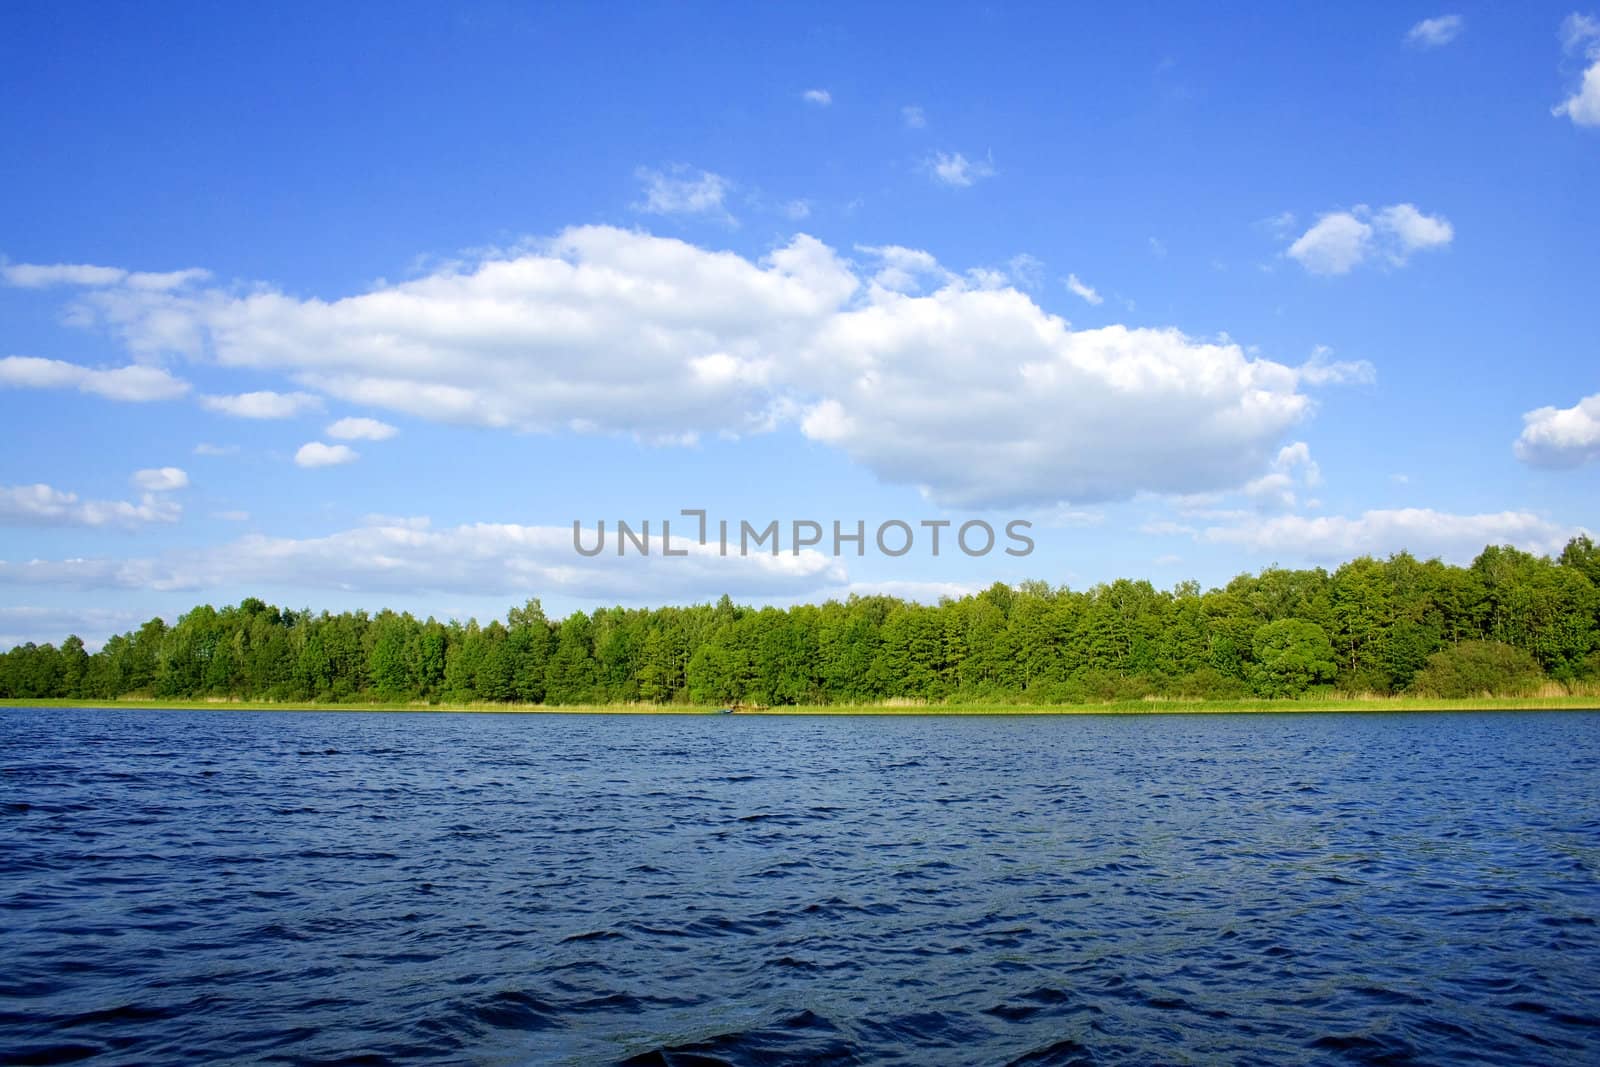 blue sky with white clouds over blue water (Poland)